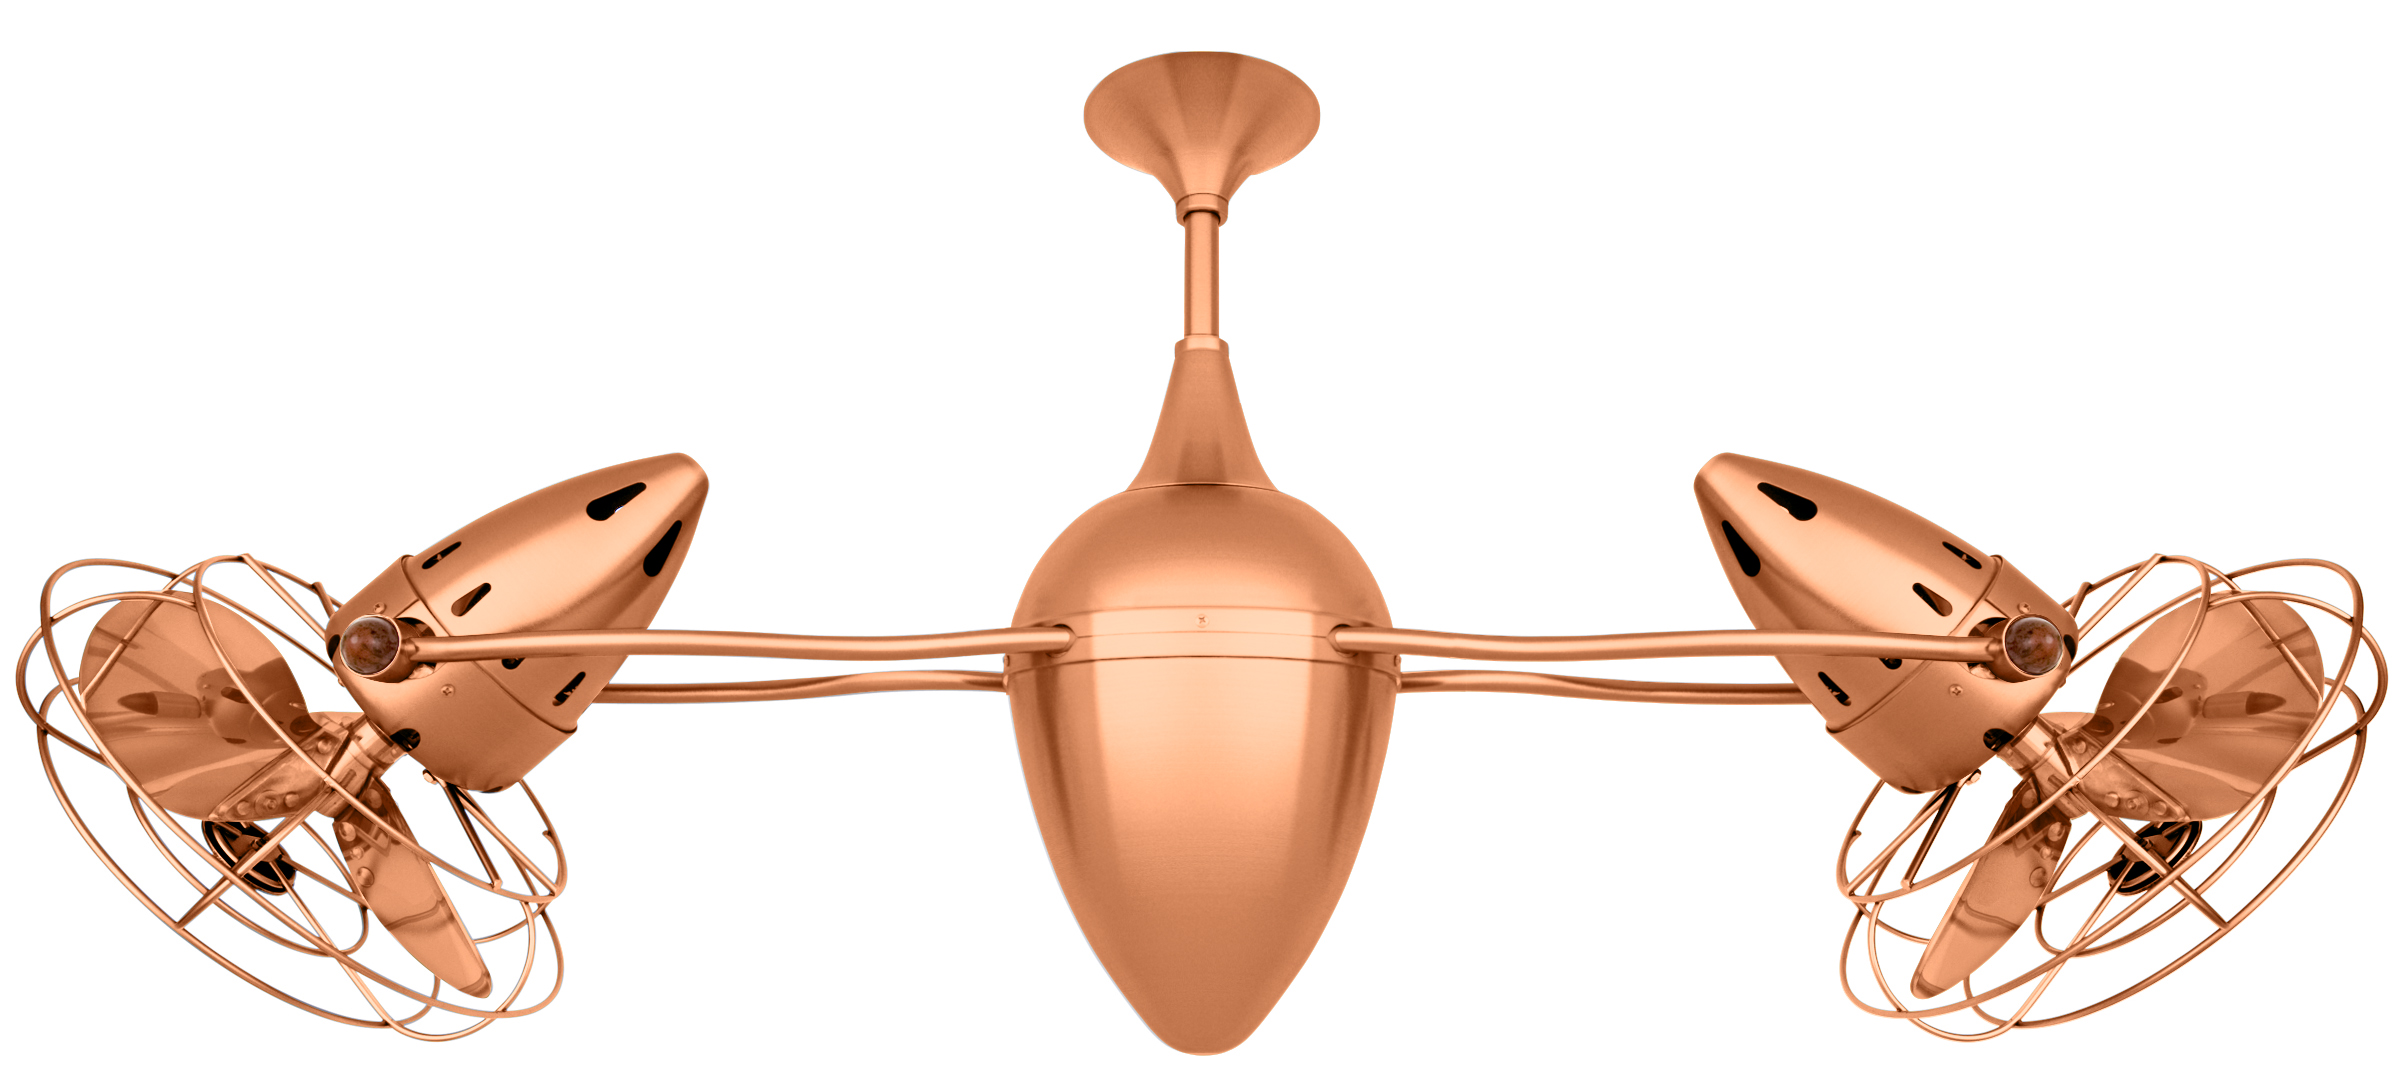 Ar Ruthiane dual headed rotational ceiling fan in brushed copper with metal blades and decorative cage made by Matthews Fan Company.